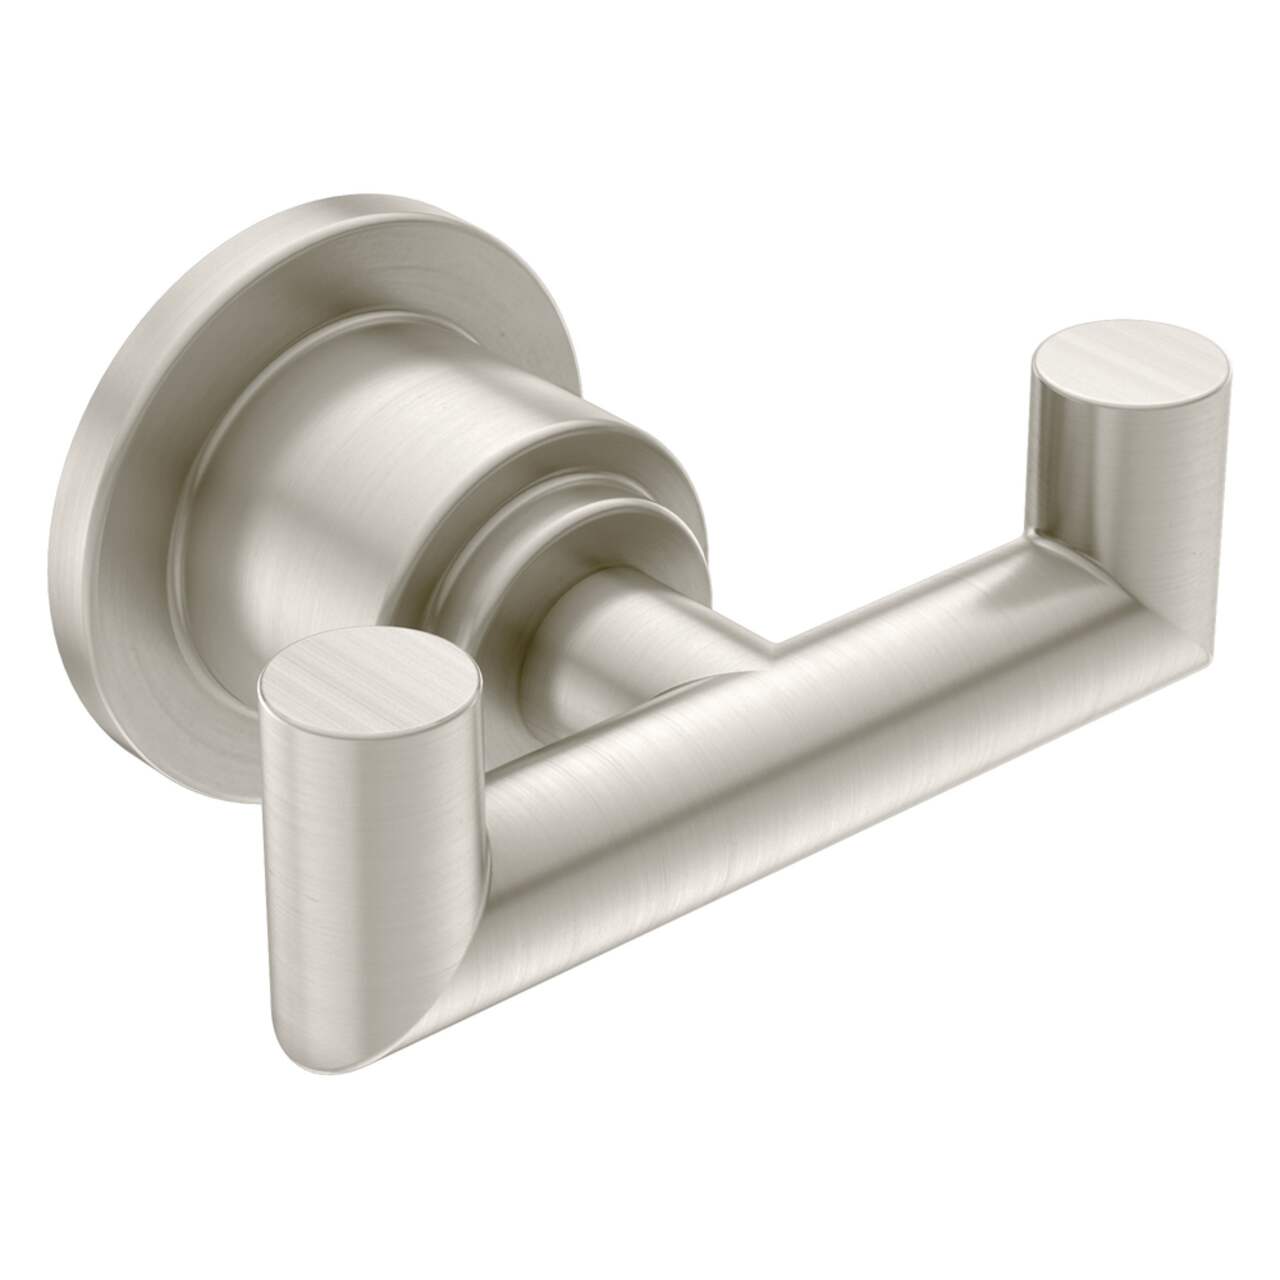 https://media-www.canadiantire.ca/product/fixing/plumbing/faucets-fixtures/7743931/moen-arris-modern-double-robe-hook-brushed-nickel-77869d26-2ae2-412b-894f-eceb02cdd9a3.png?imdensity=1&imwidth=640&impolicy=mZoom